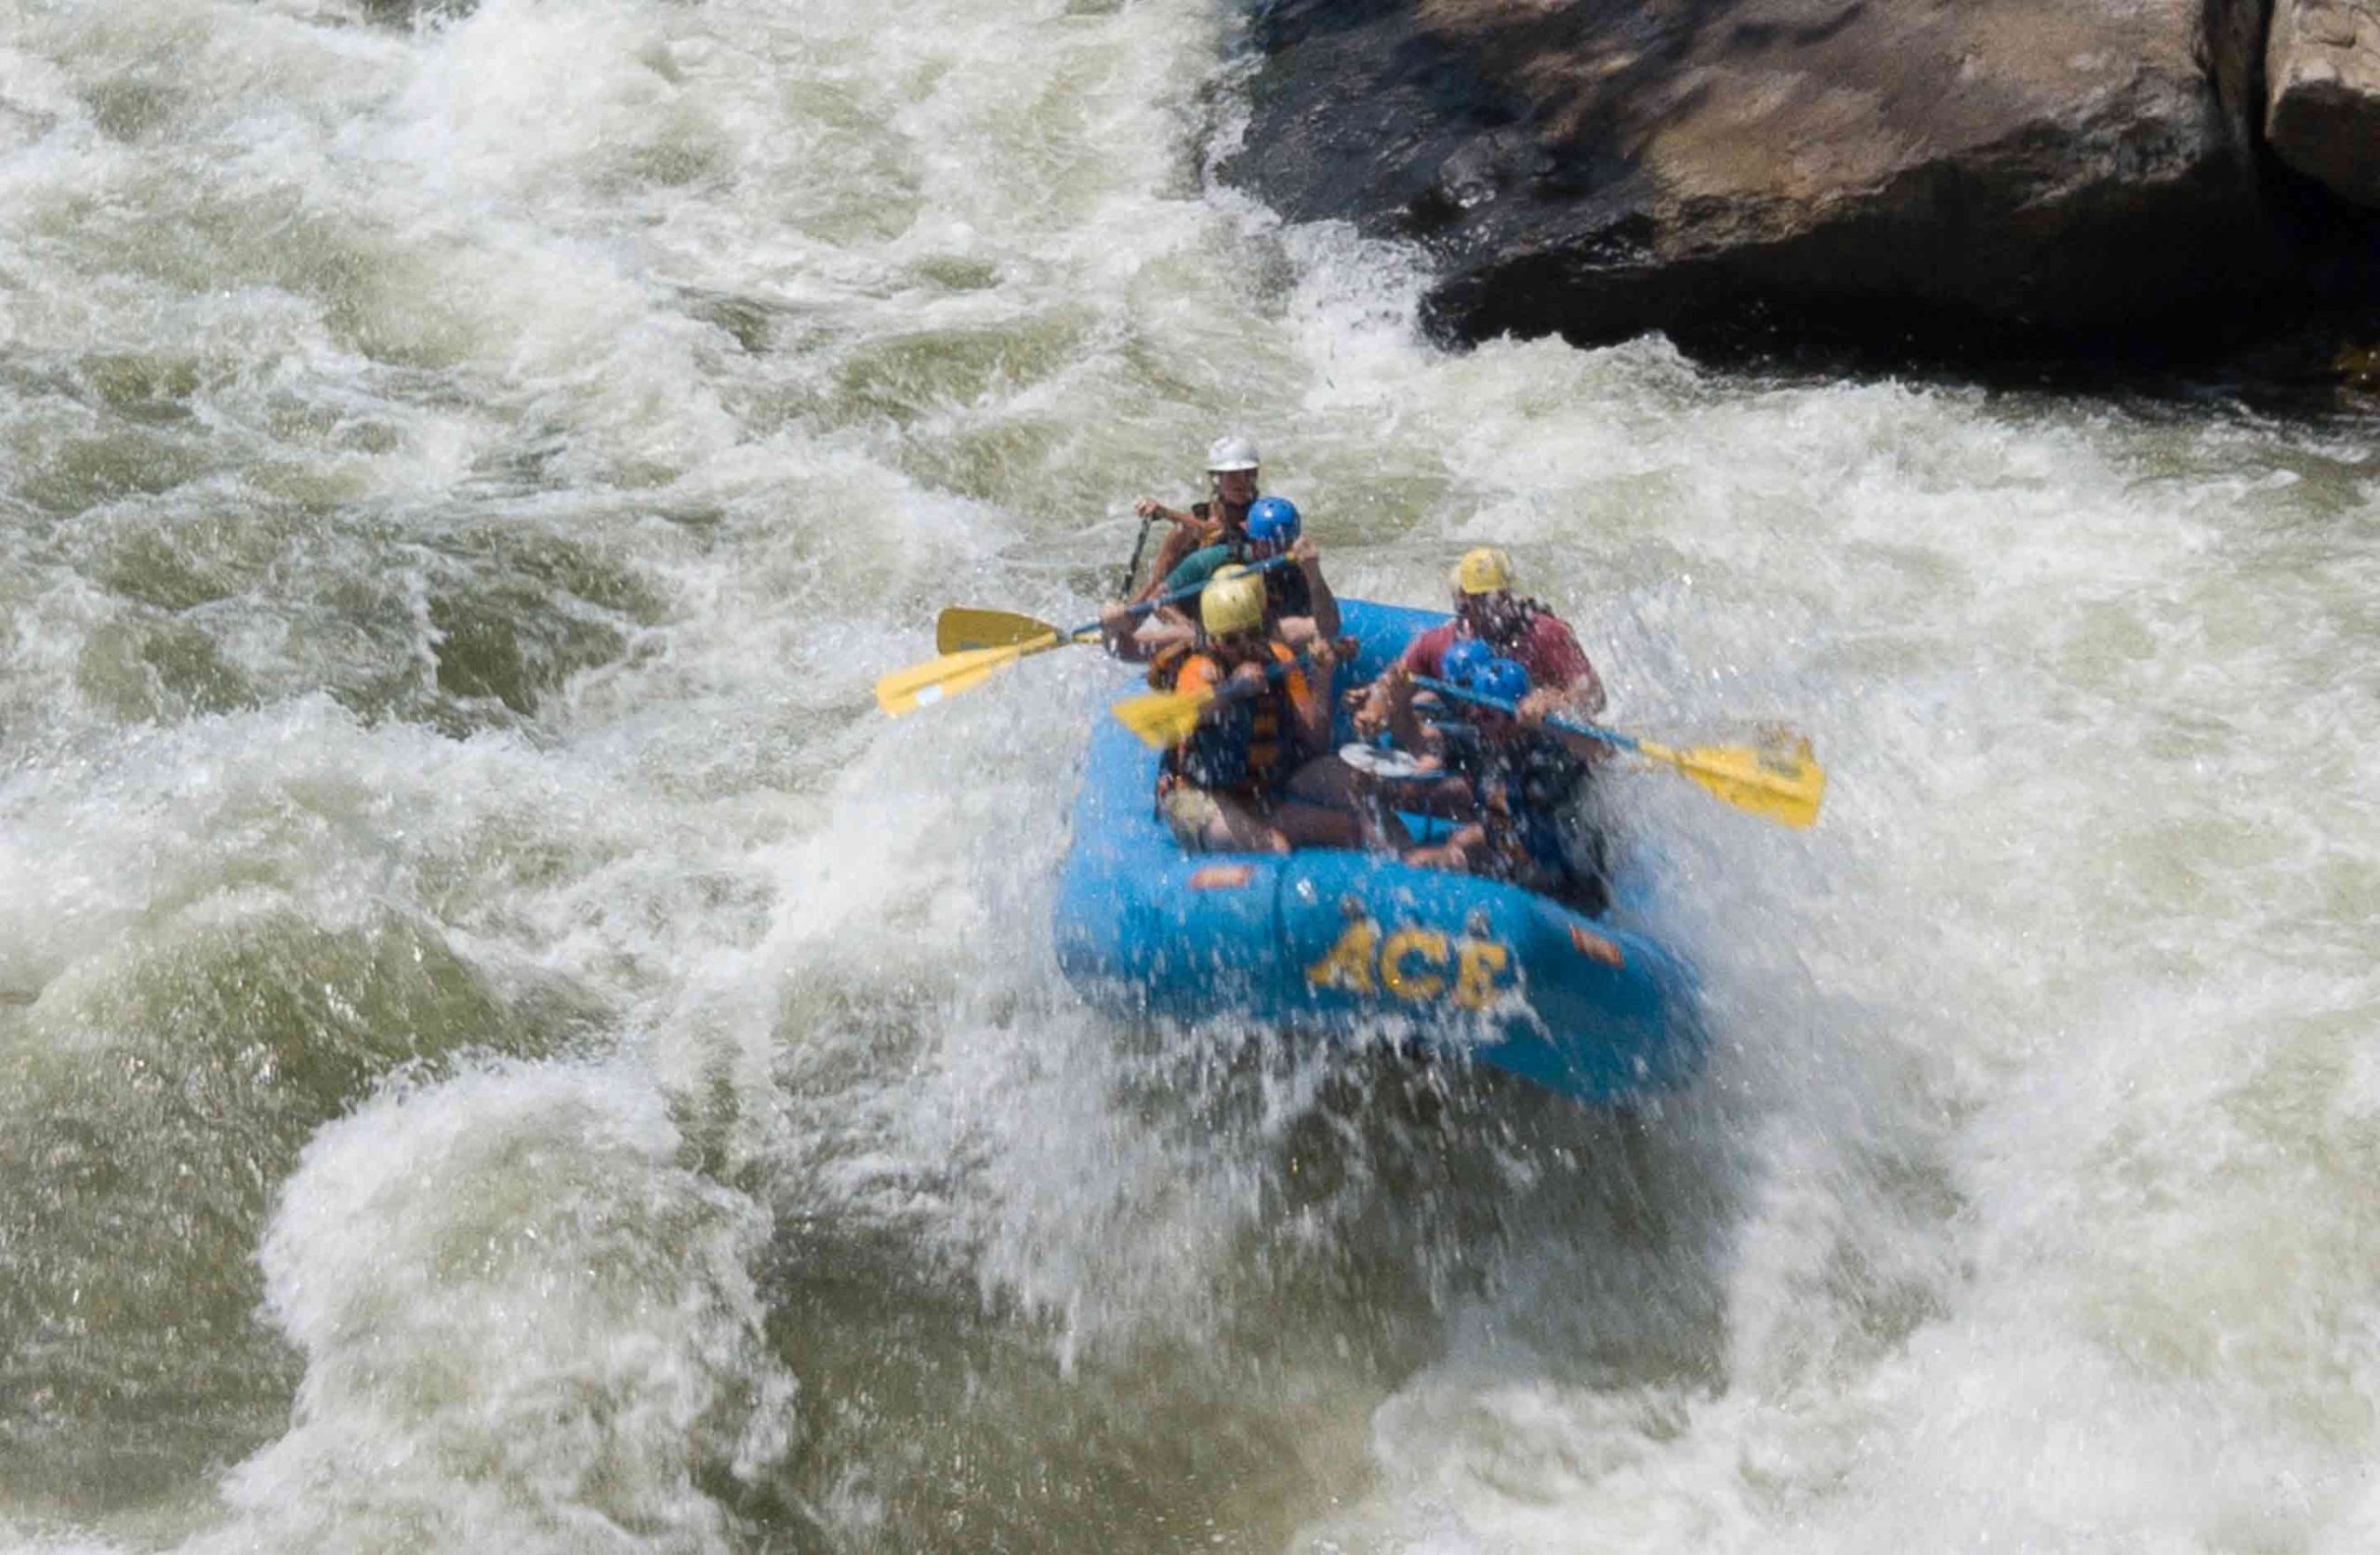 Taming the Rapids: White-Water Rafting Adventures